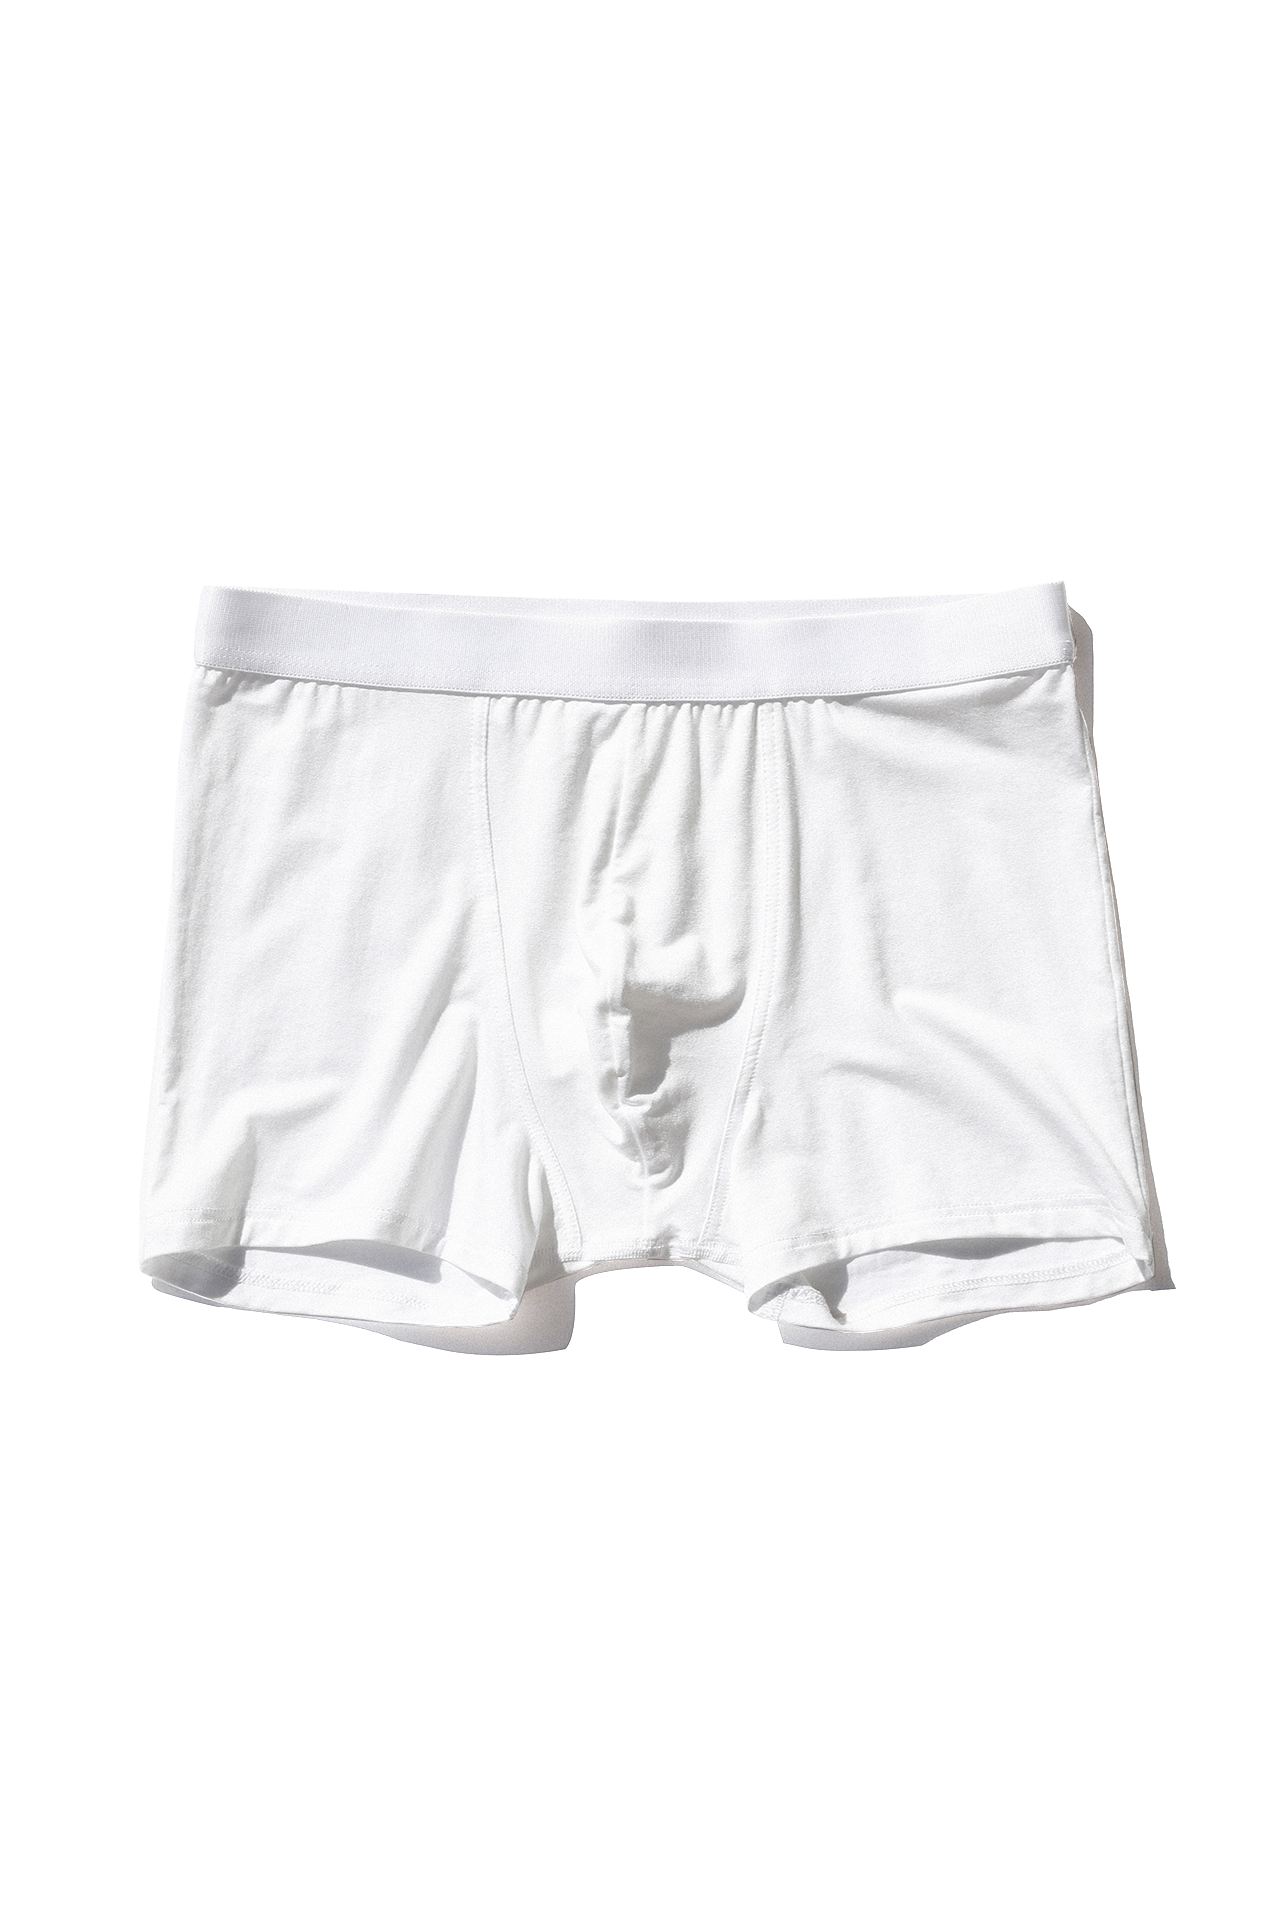 Sunspel Boxer Brief White Front Image (4672740458611)